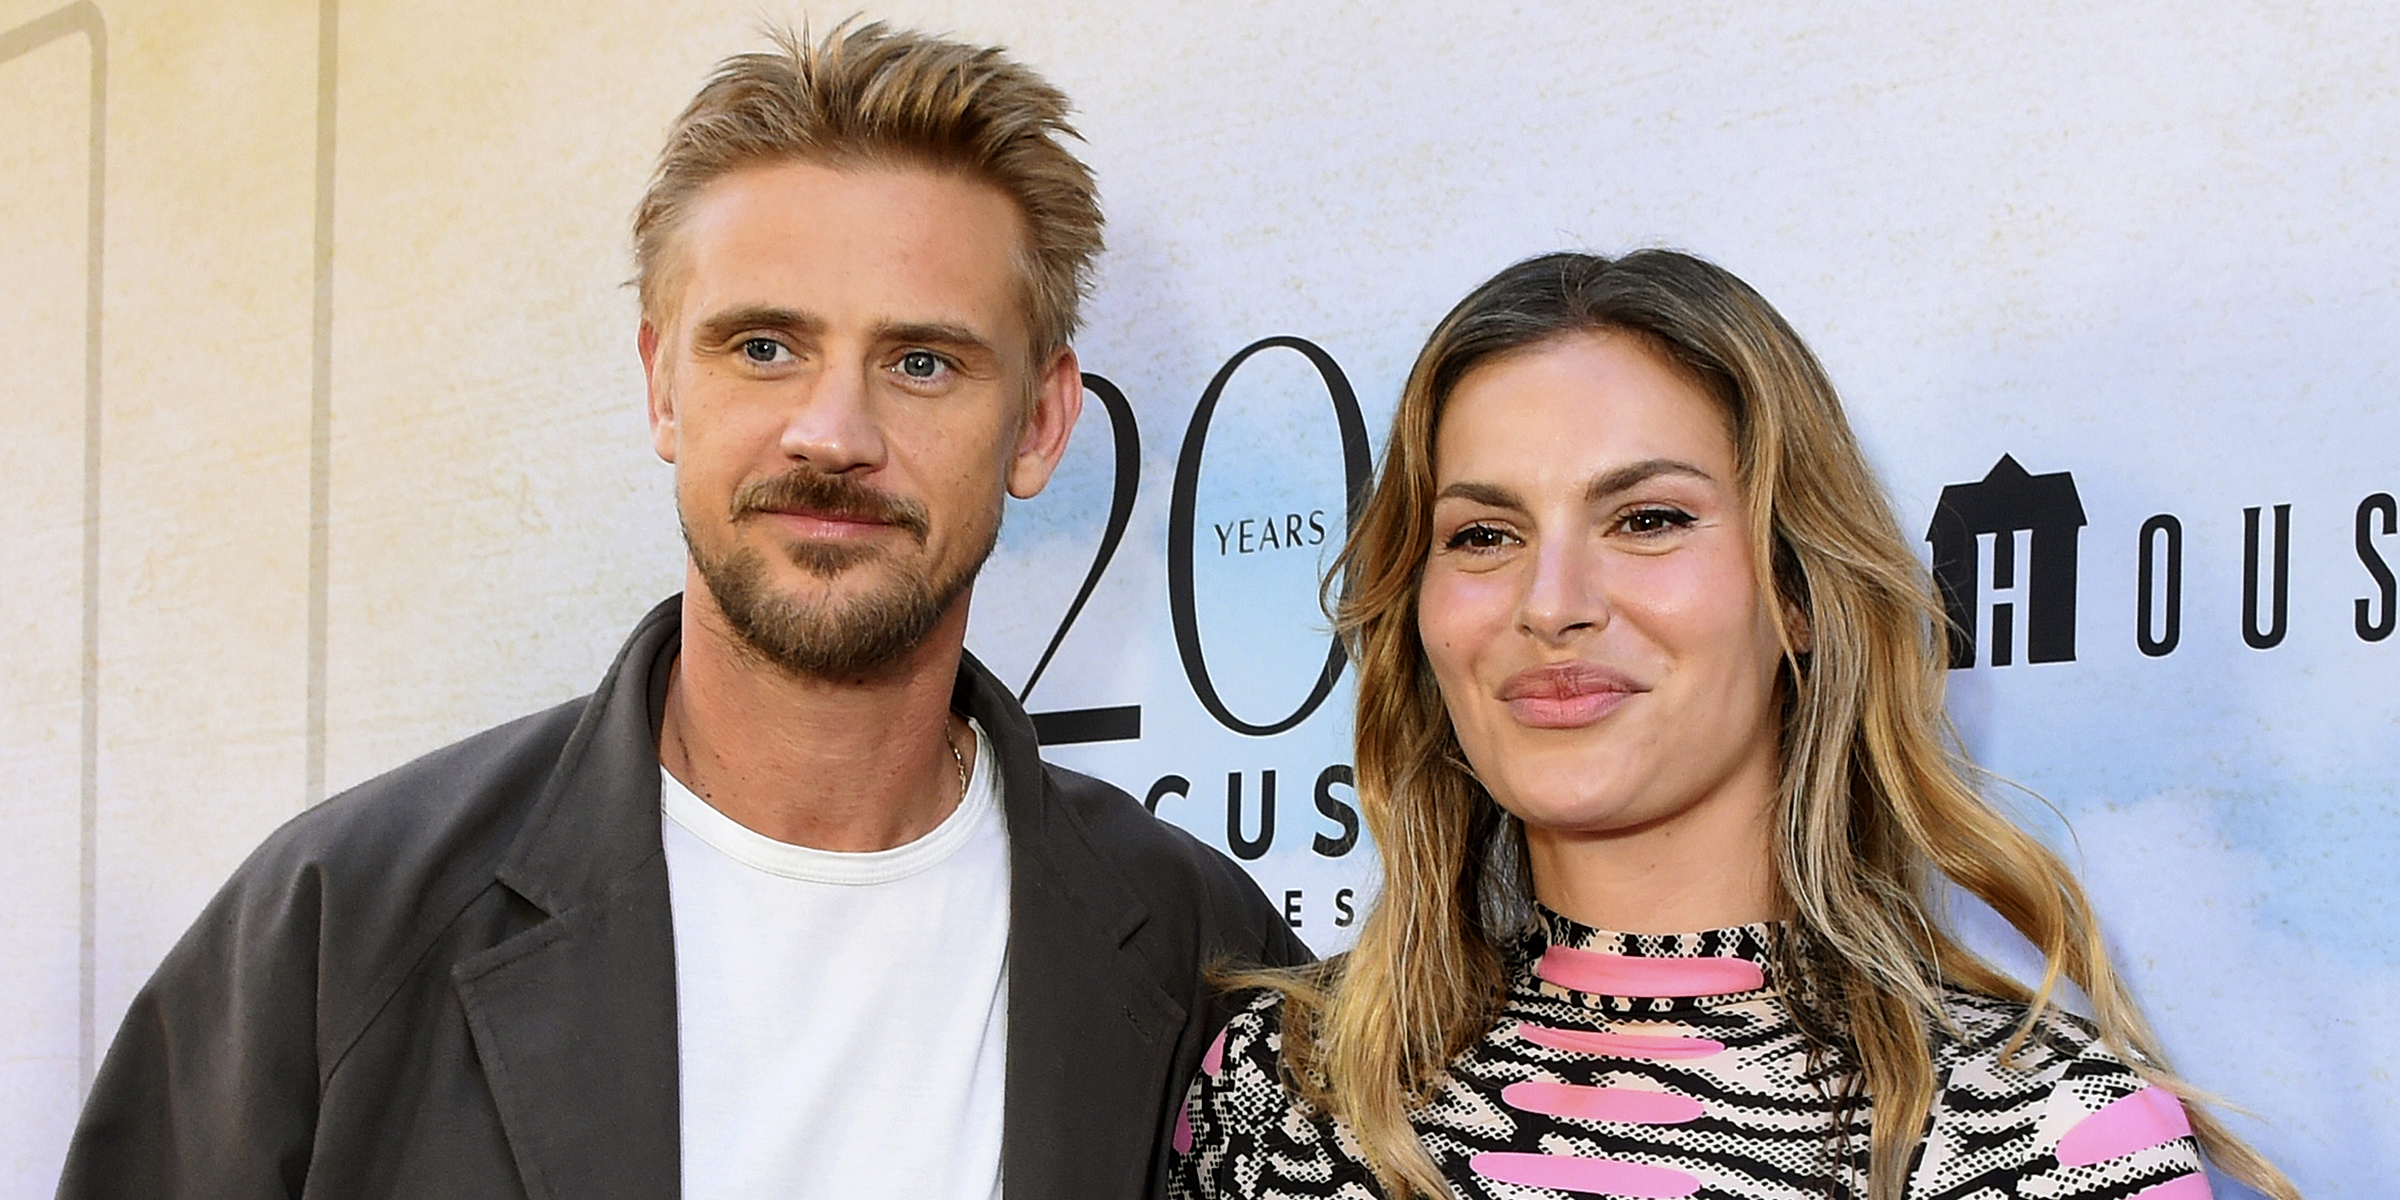 Boyd Holbrook and Tatiana Pajkovic | Source: Getty Images